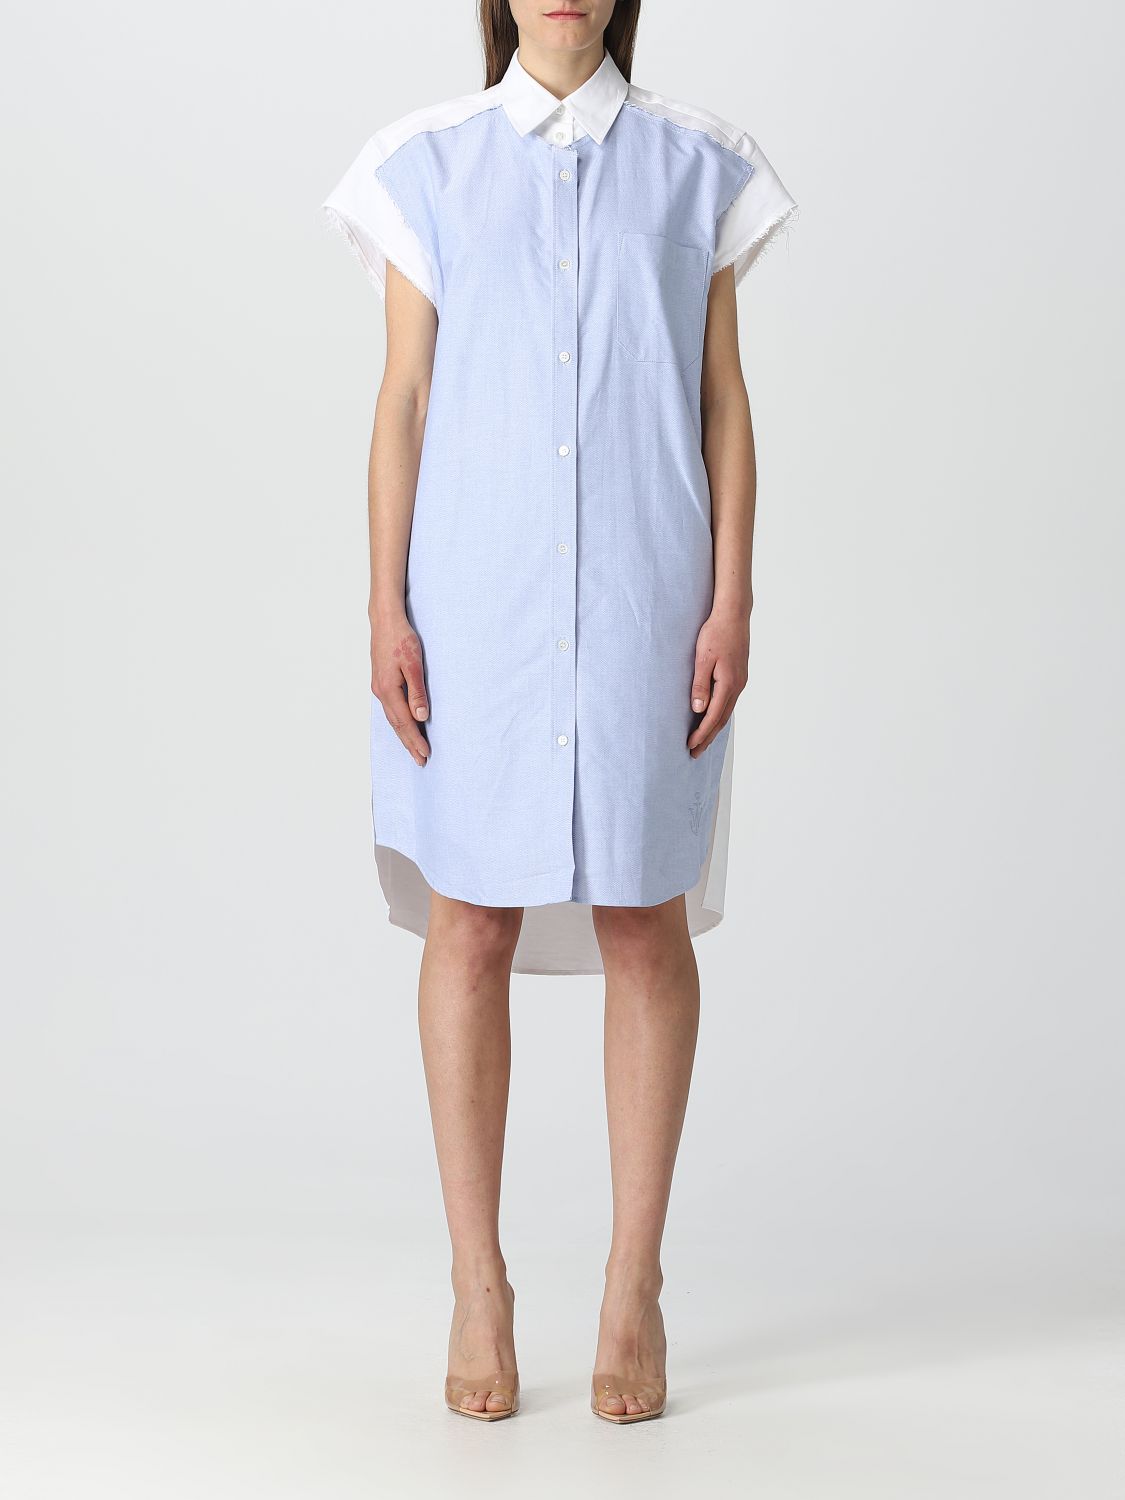 JW ANDERSON: dress for woman - Blue | Jw Anderson dress DR0327PG1140 ...